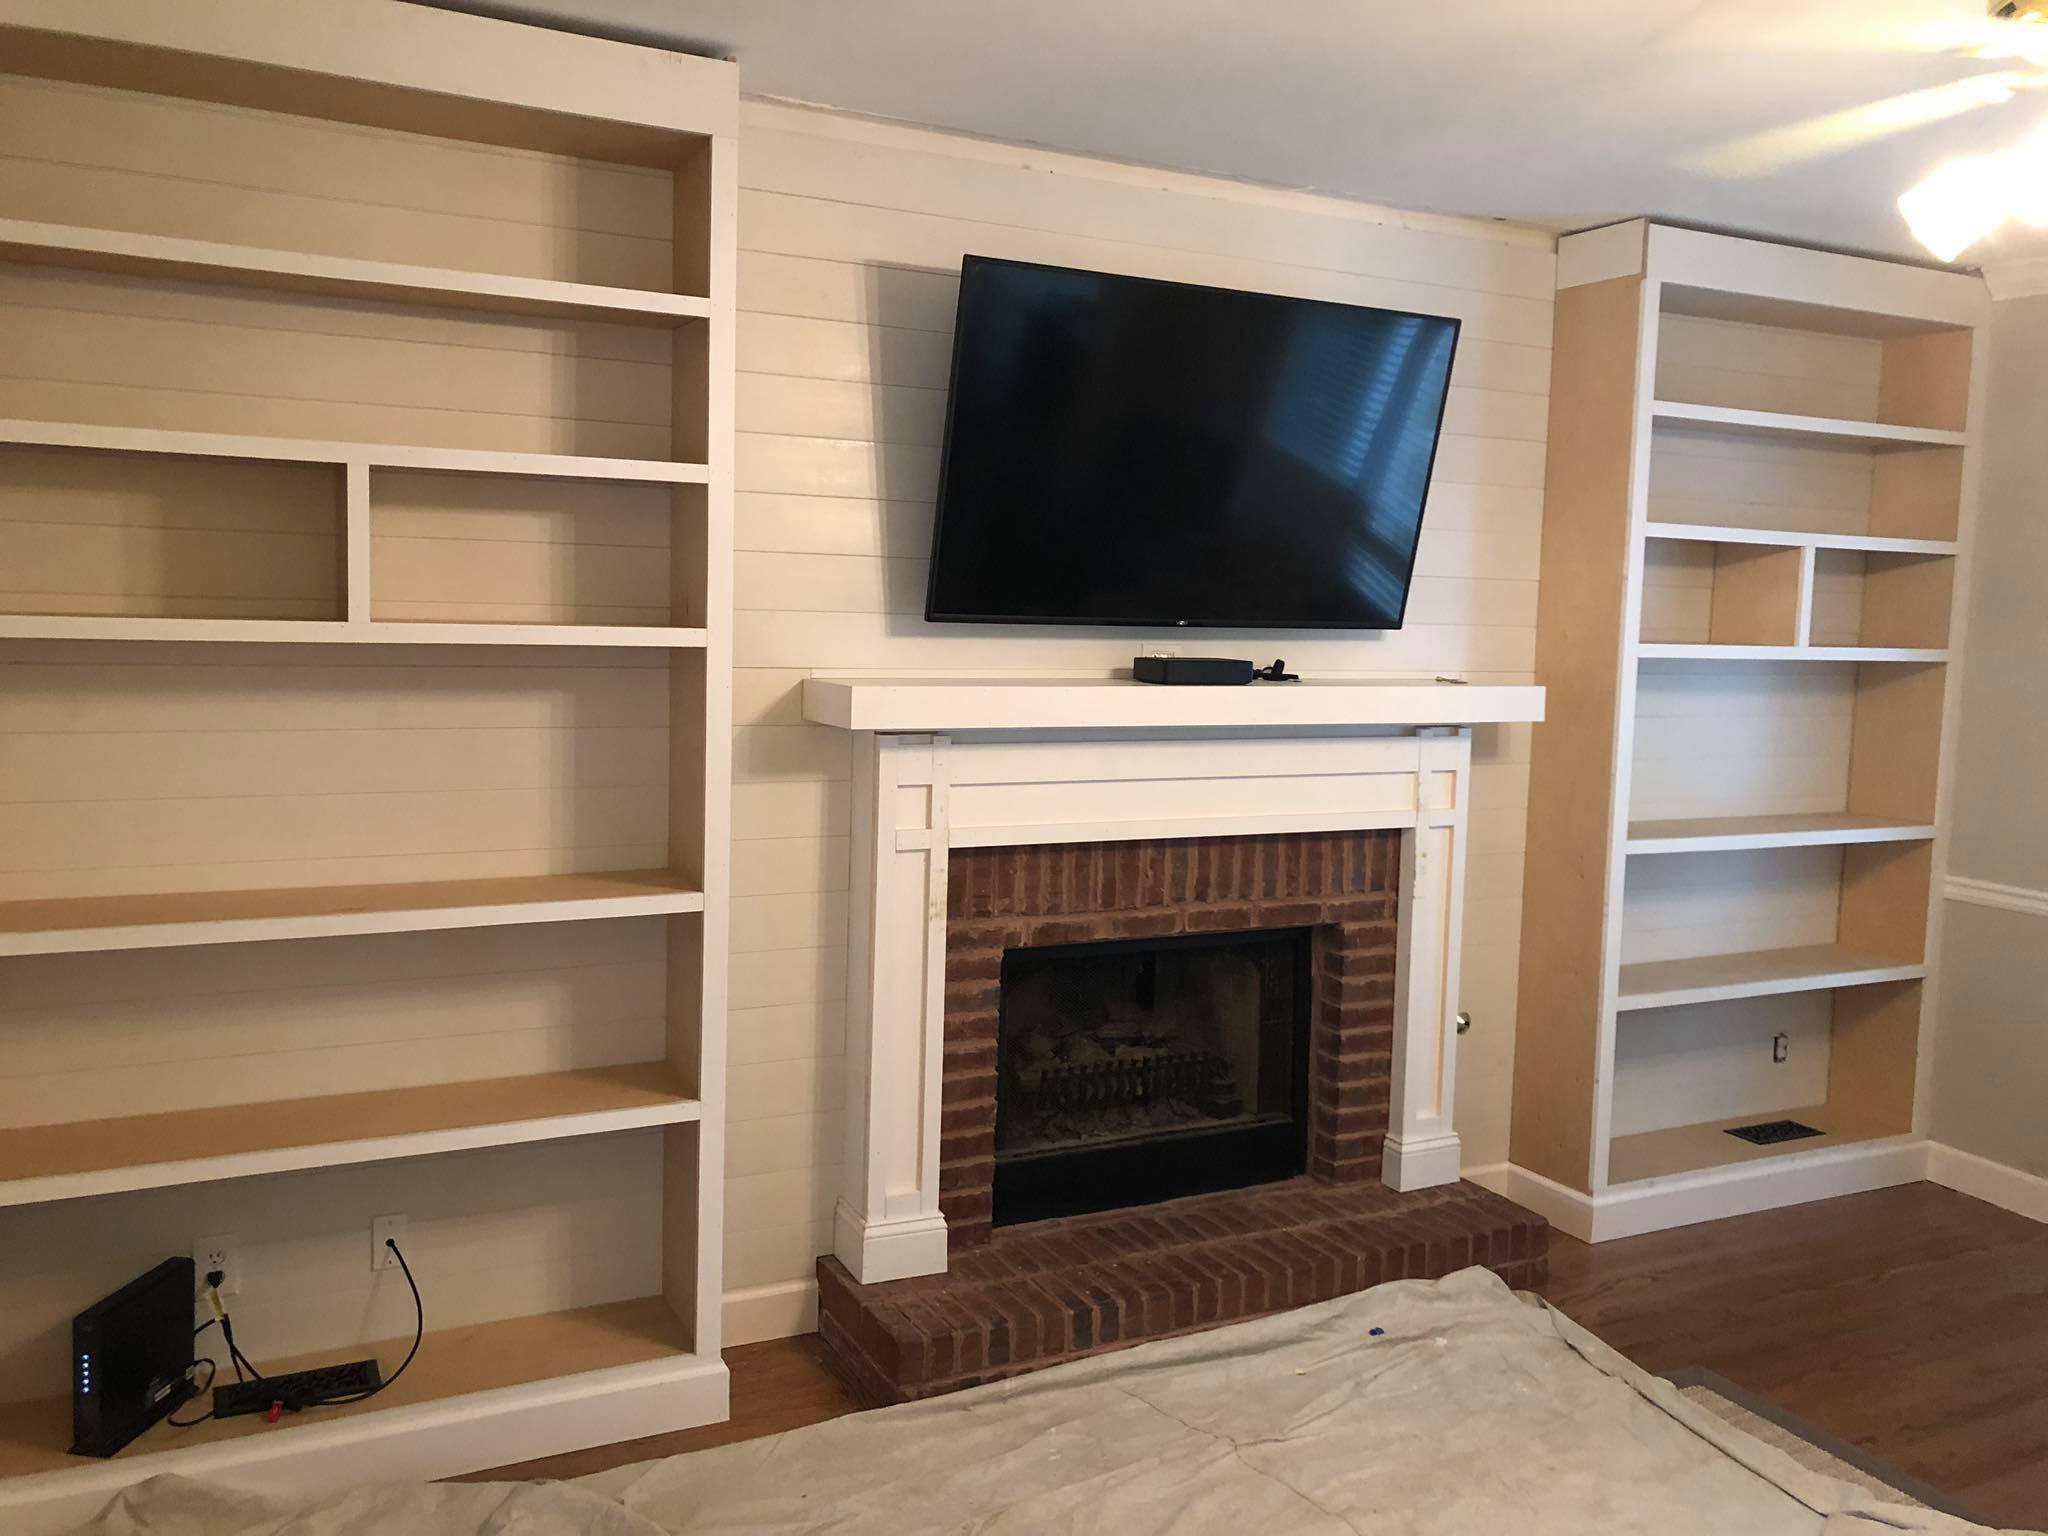 Fireplace Custom Wall High Built in Cabinets Shelves and Trim Painted White Installed 2